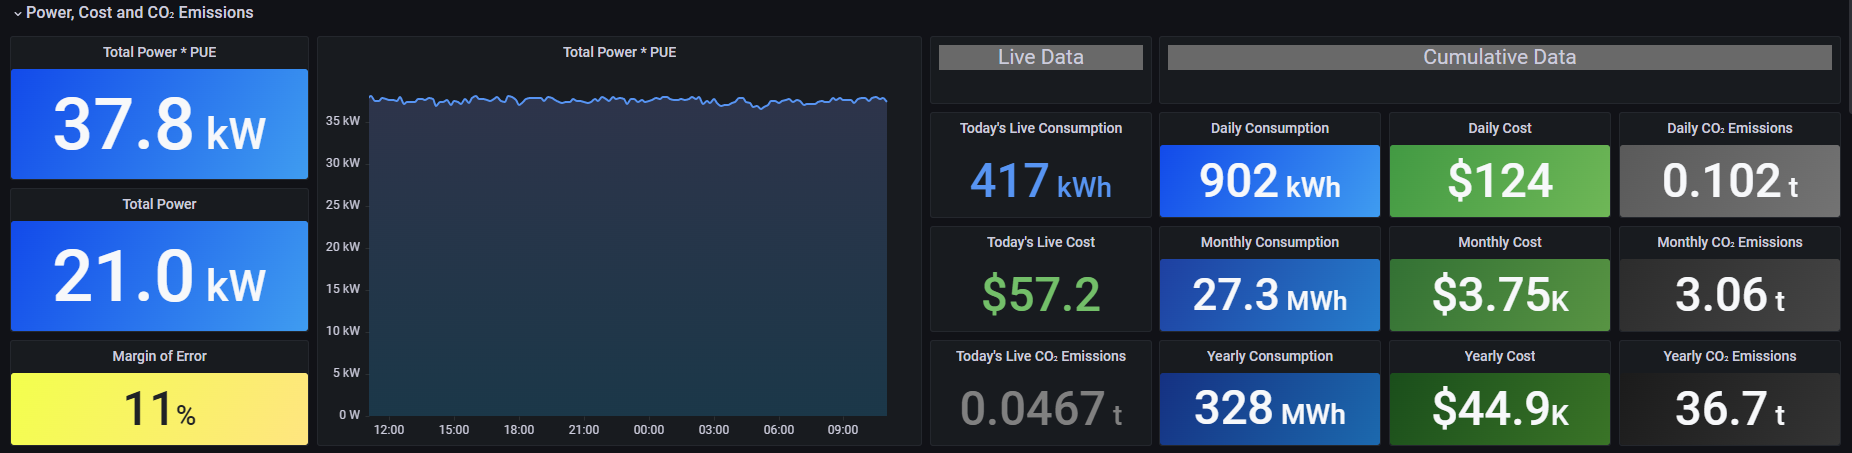 Grafana - Reporting the energy usage and carbon emissions